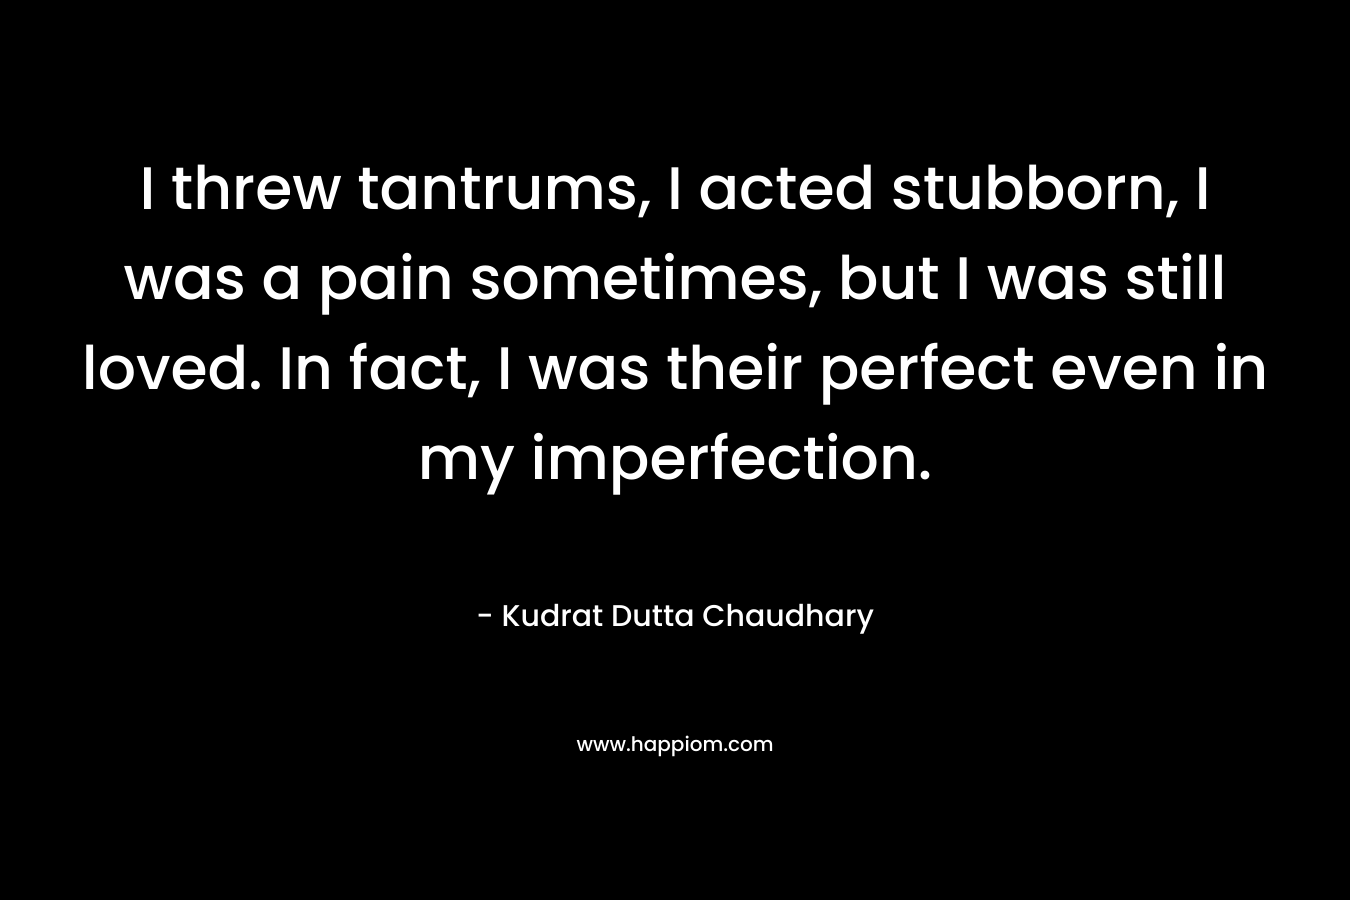 I threw tantrums, I acted stubborn, I was a pain sometimes, but I was still loved. In fact, I was their perfect even in my imperfection. – Kudrat Dutta Chaudhary